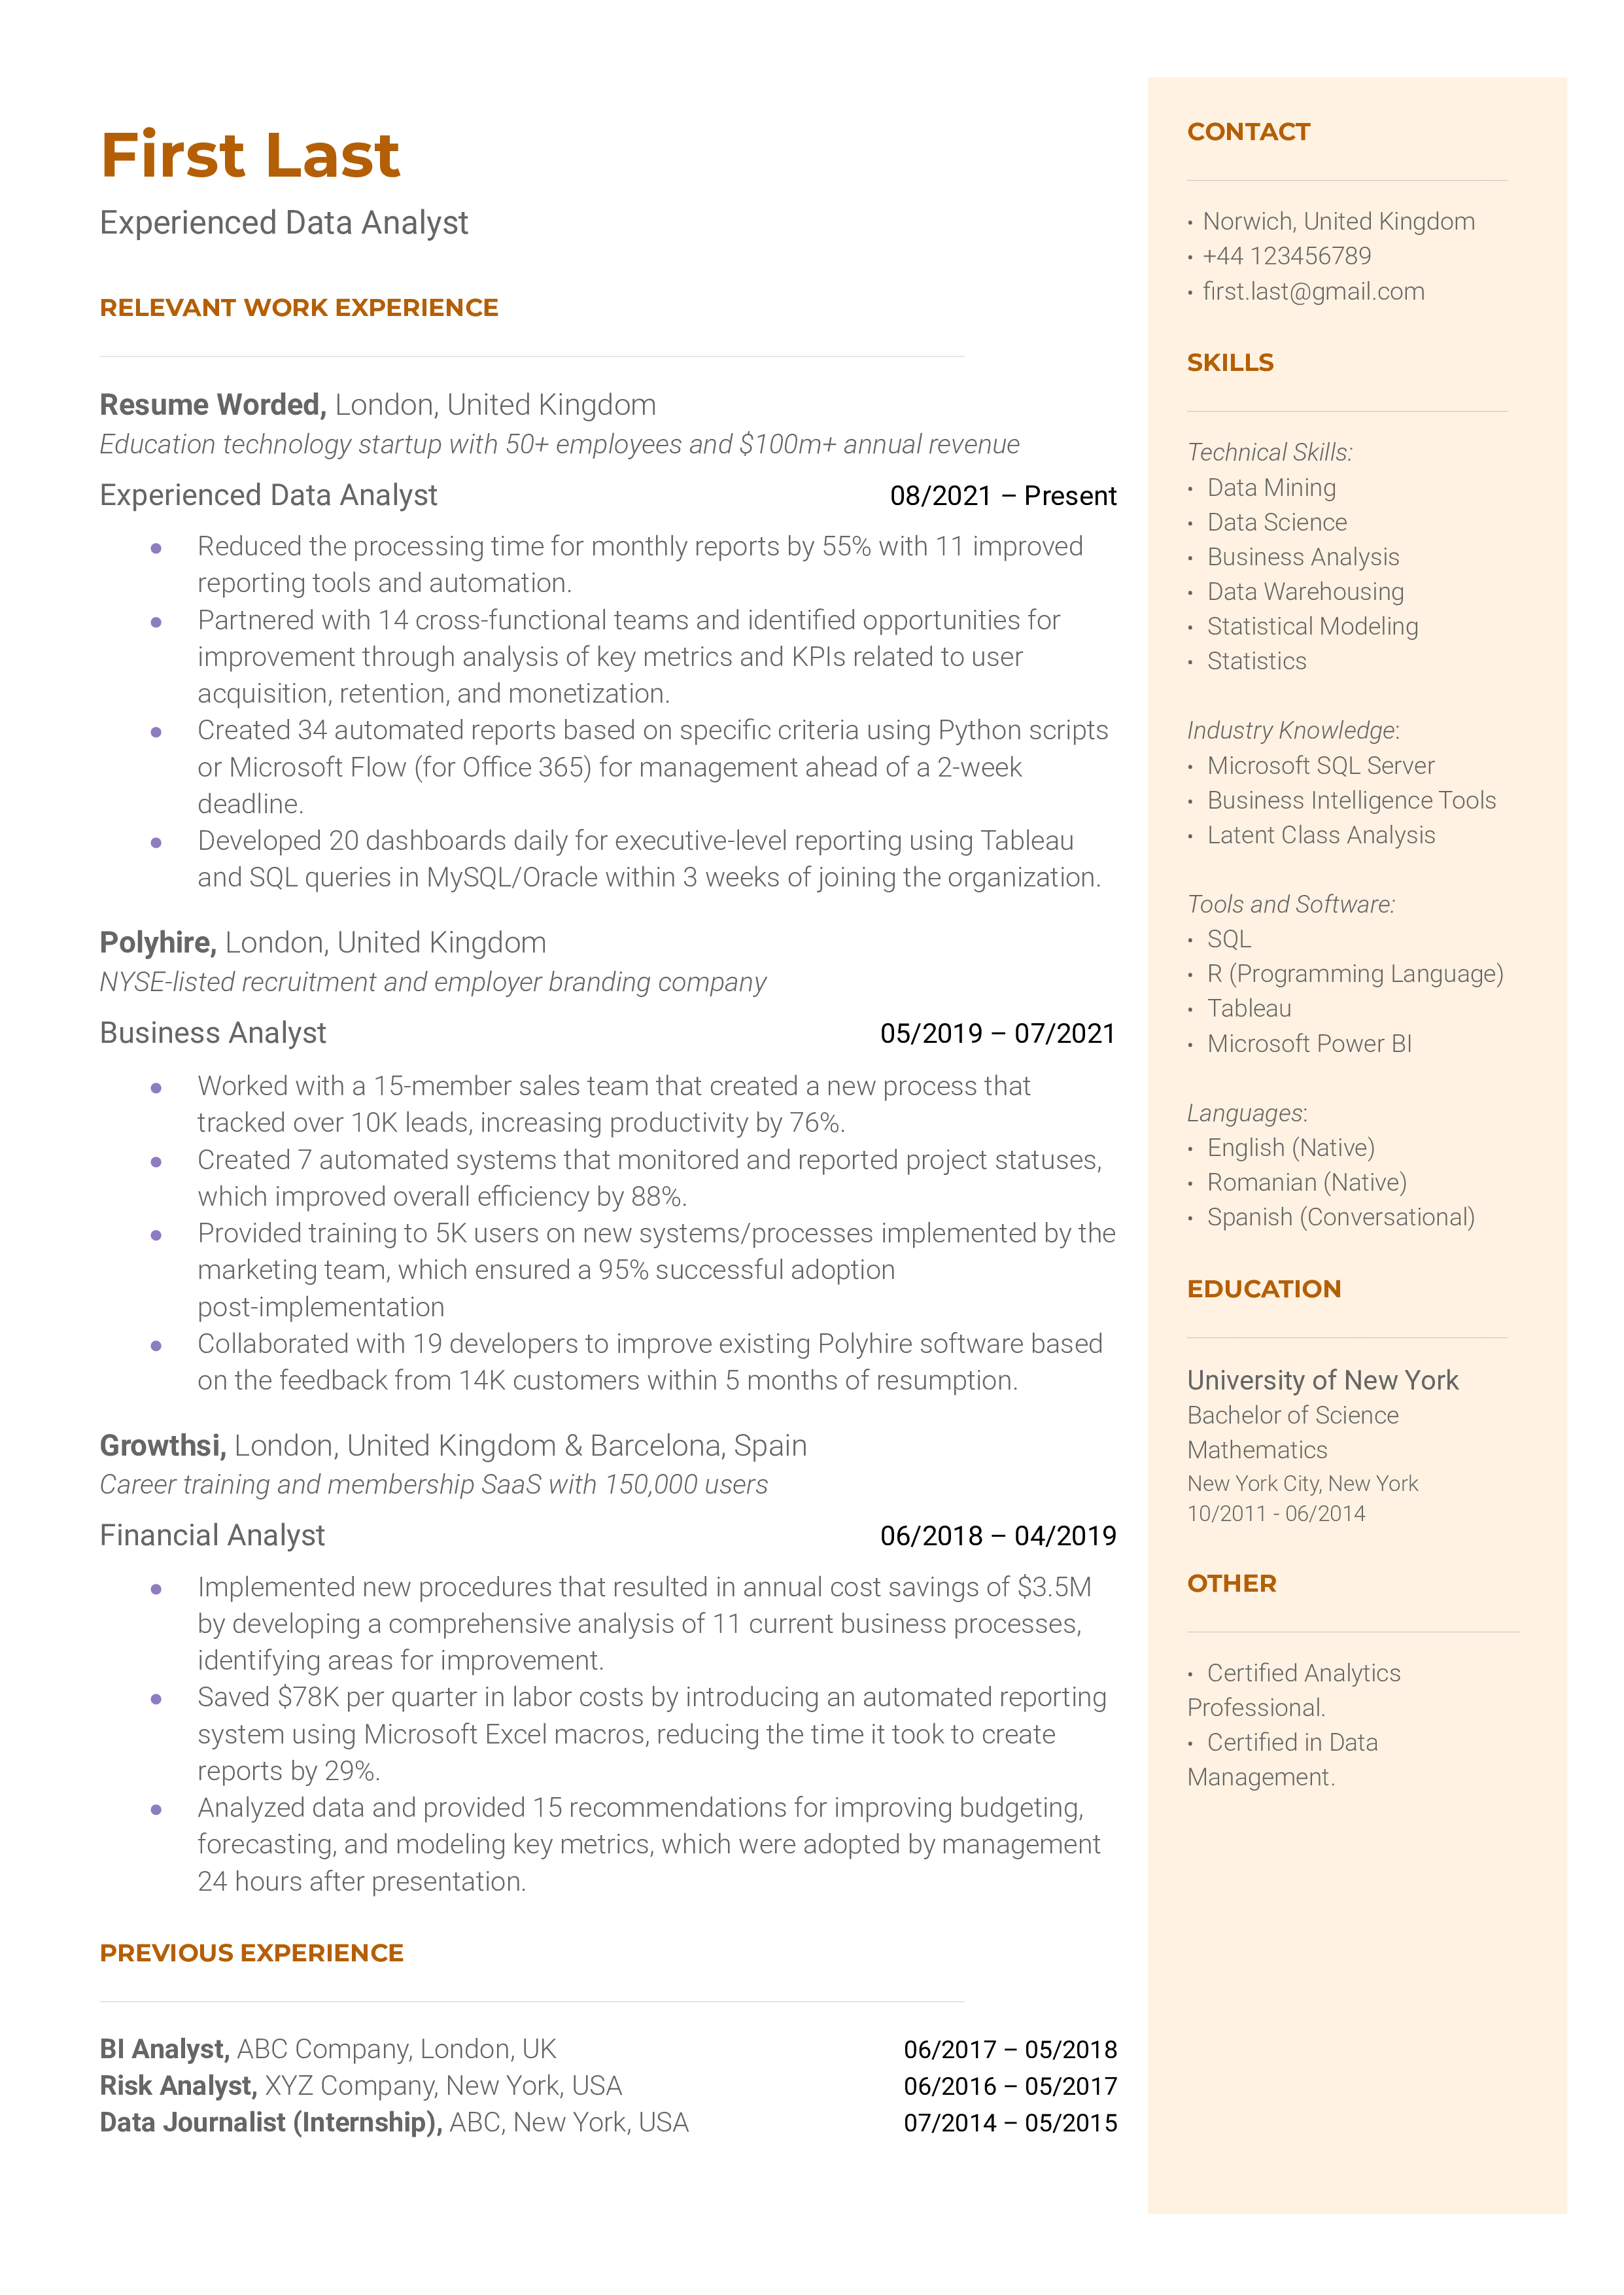 Experienced data analyst's CV displaying data storytelling and advanced methodologies.